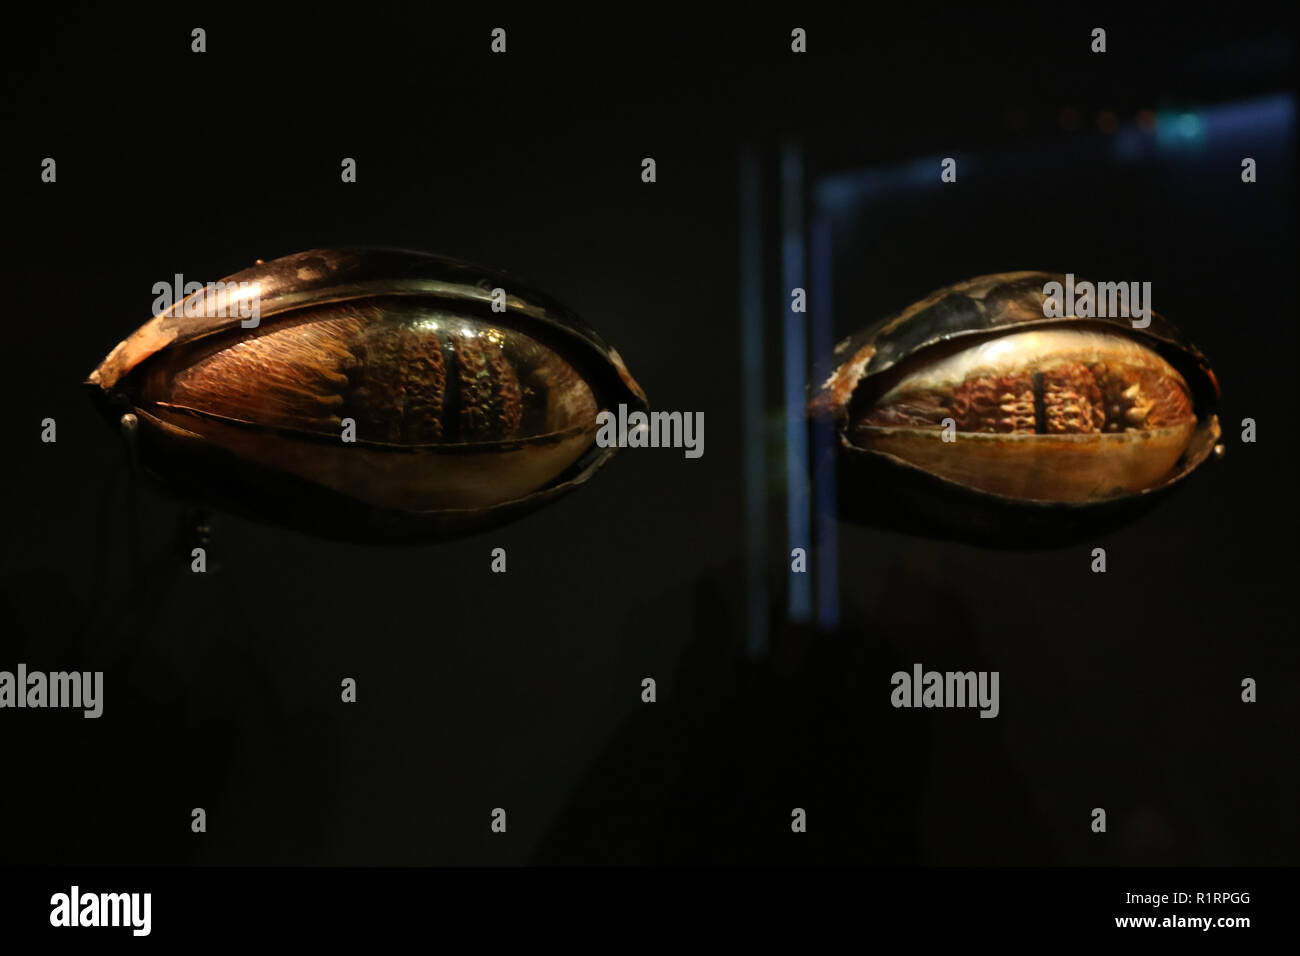 Sydney, Australia. 15 November 2018. Media preview of STAR WARS Identities: The Exhibition at the Powerhouse Museum. Pictured: Jabba’s Eyes from Star Wars: Episode VI Return of the Jedi (1983). Jabba the Hutt’s eyeballs and eyelids were manipulated by remote control and were capable of a full range of actions. They are among a very few remaining pieces of the massive puppet built for Return of the Jedi. Credit: Richard Milnes/Alamy Live News Stock Photo